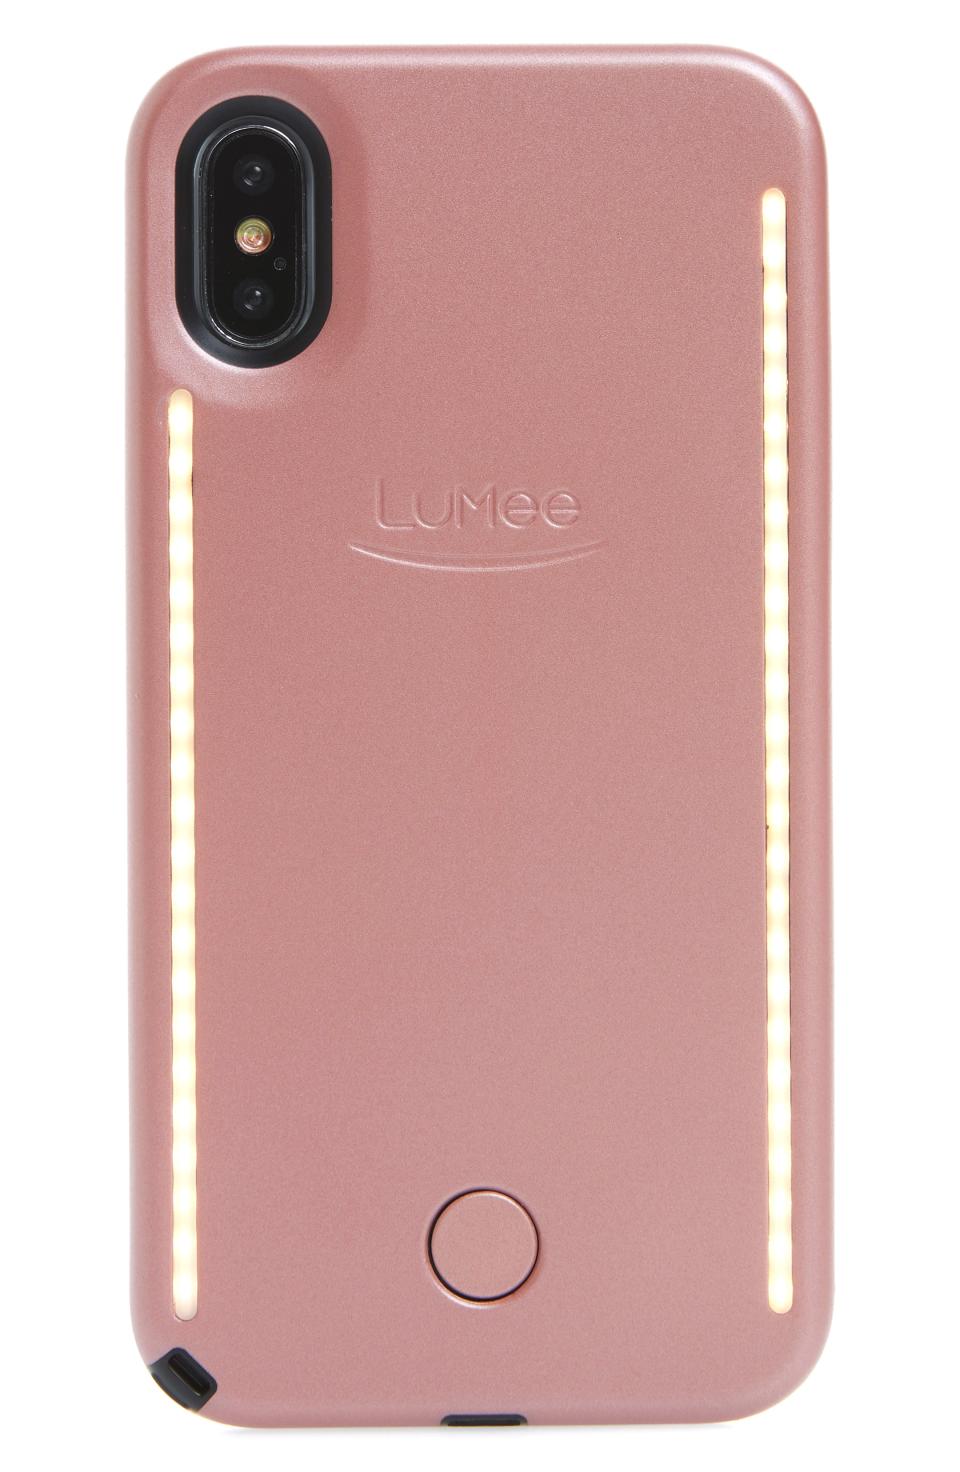 12) A Phone Case That Gives You a Perfectly *Lit* Picture